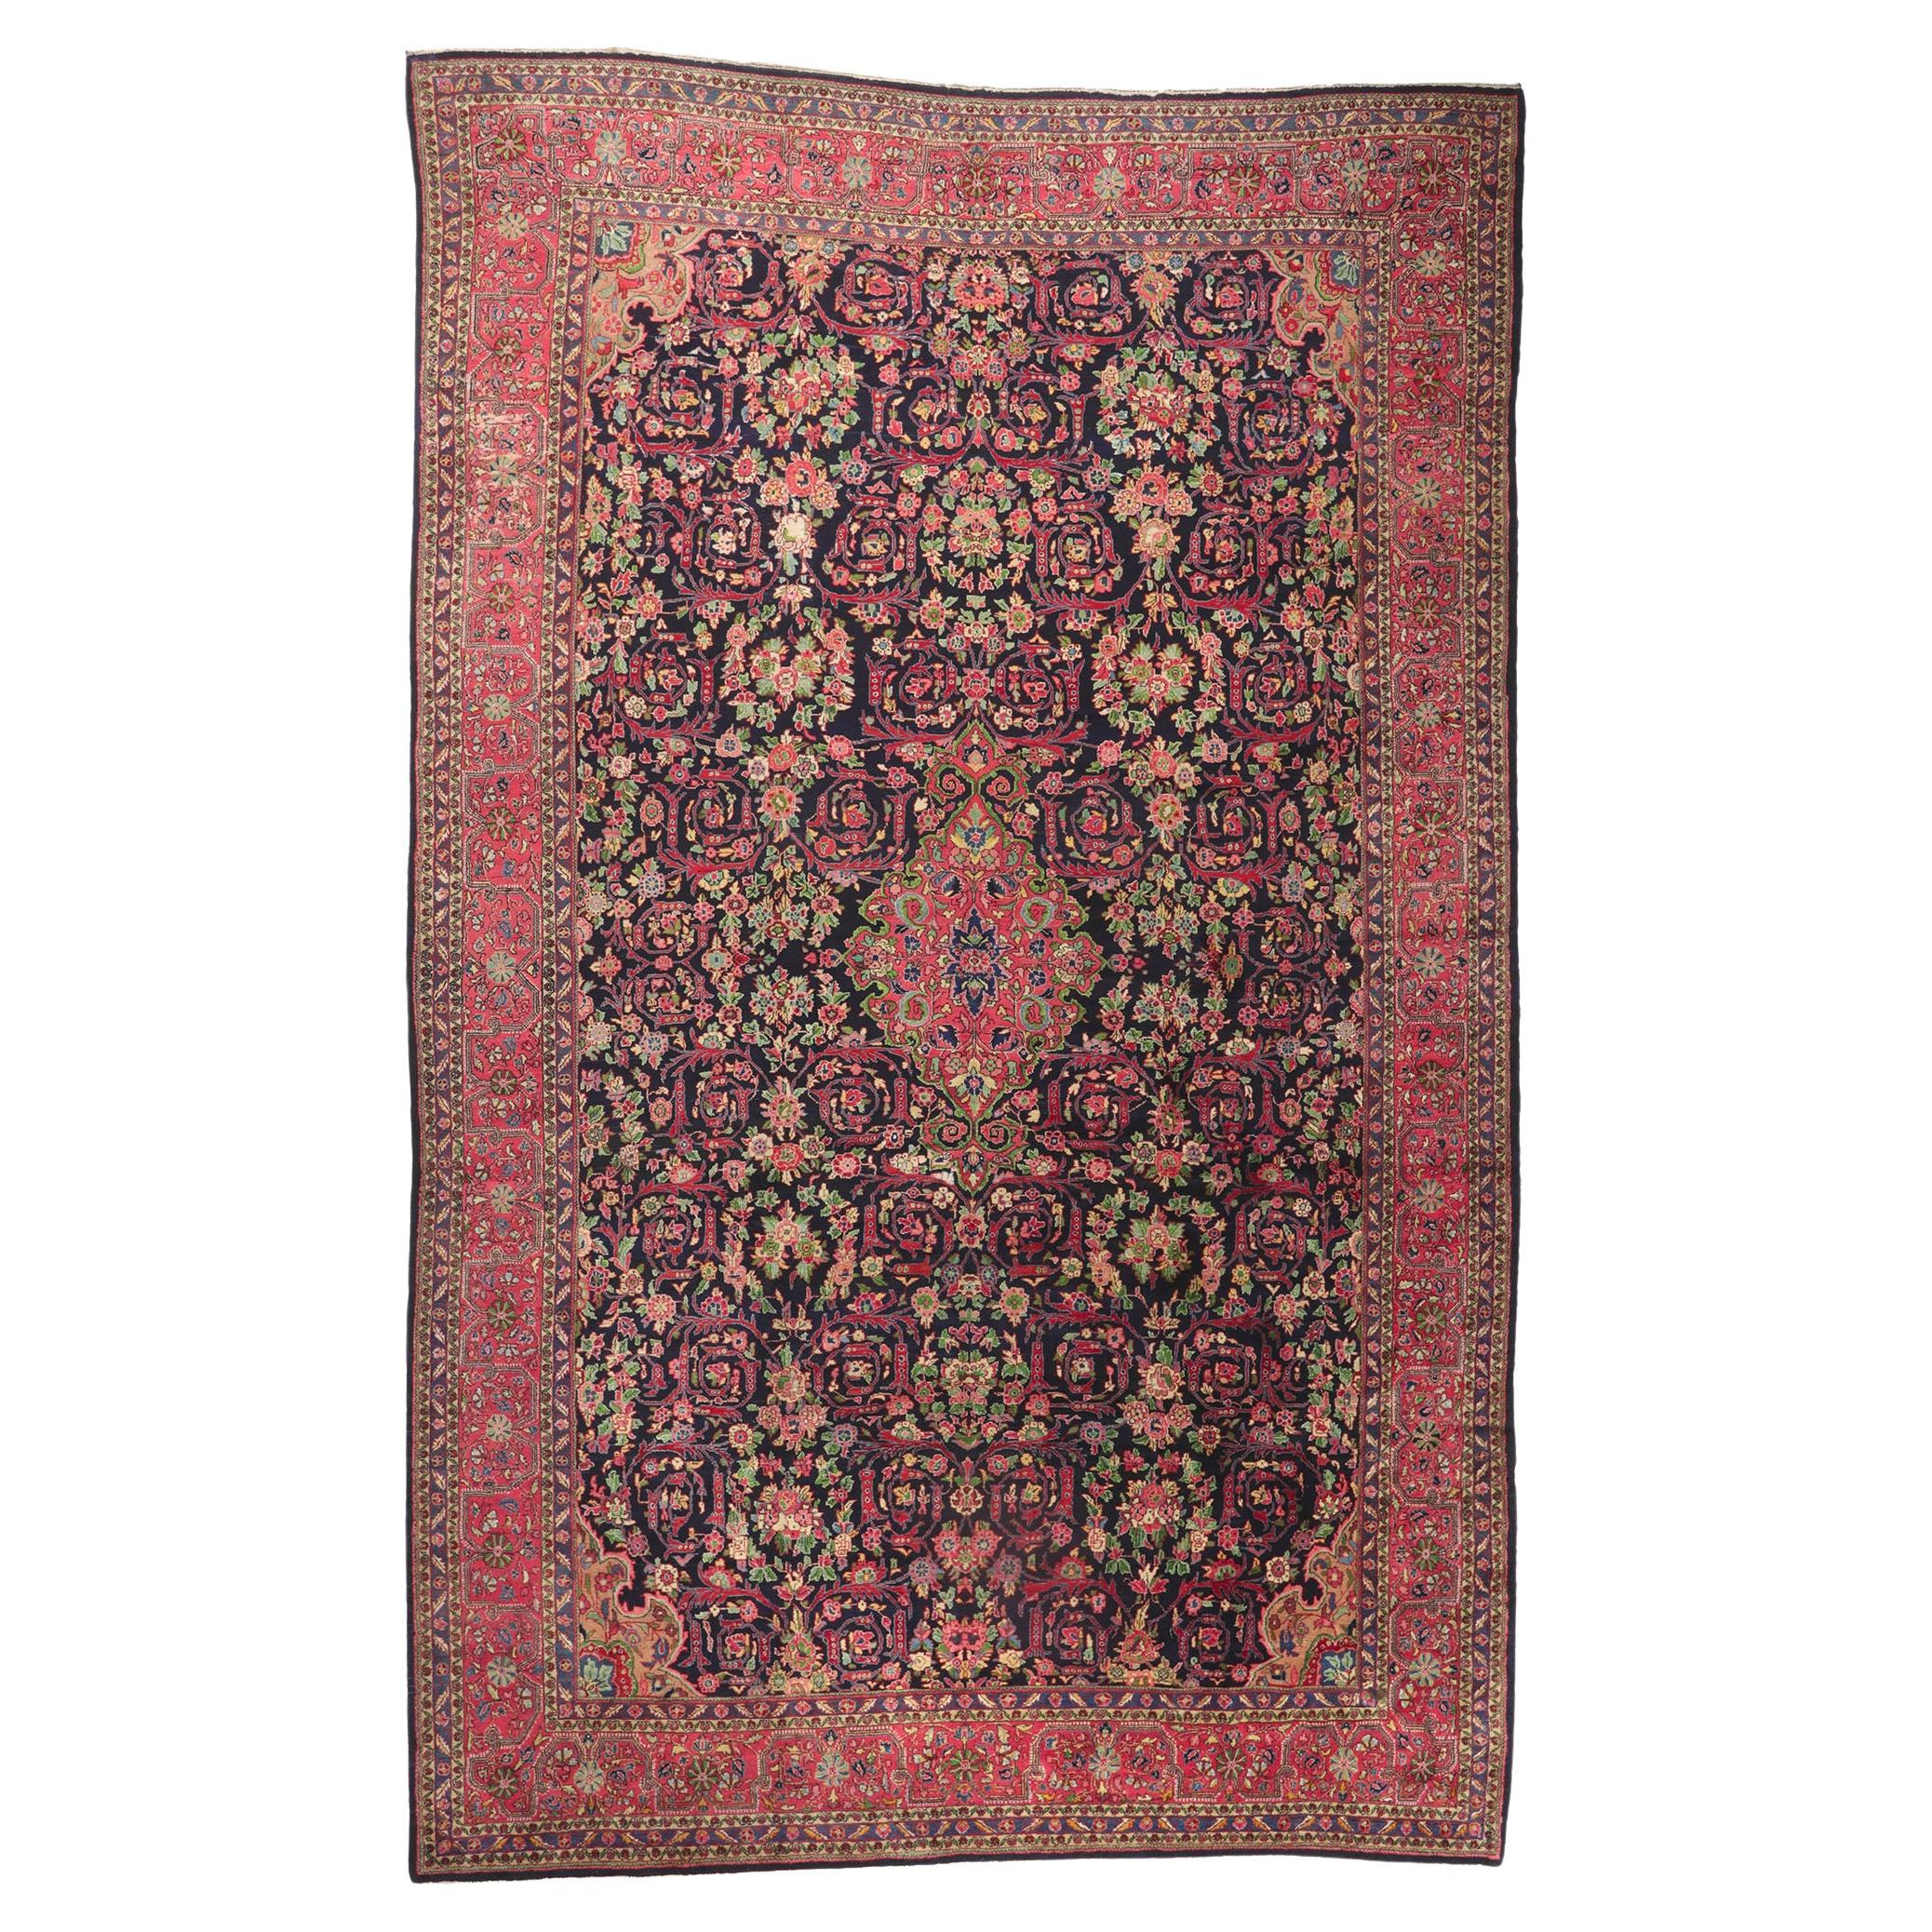 Oversized Antique Persian Malayer Rug, Classic Elegance Meets Timeless Allure